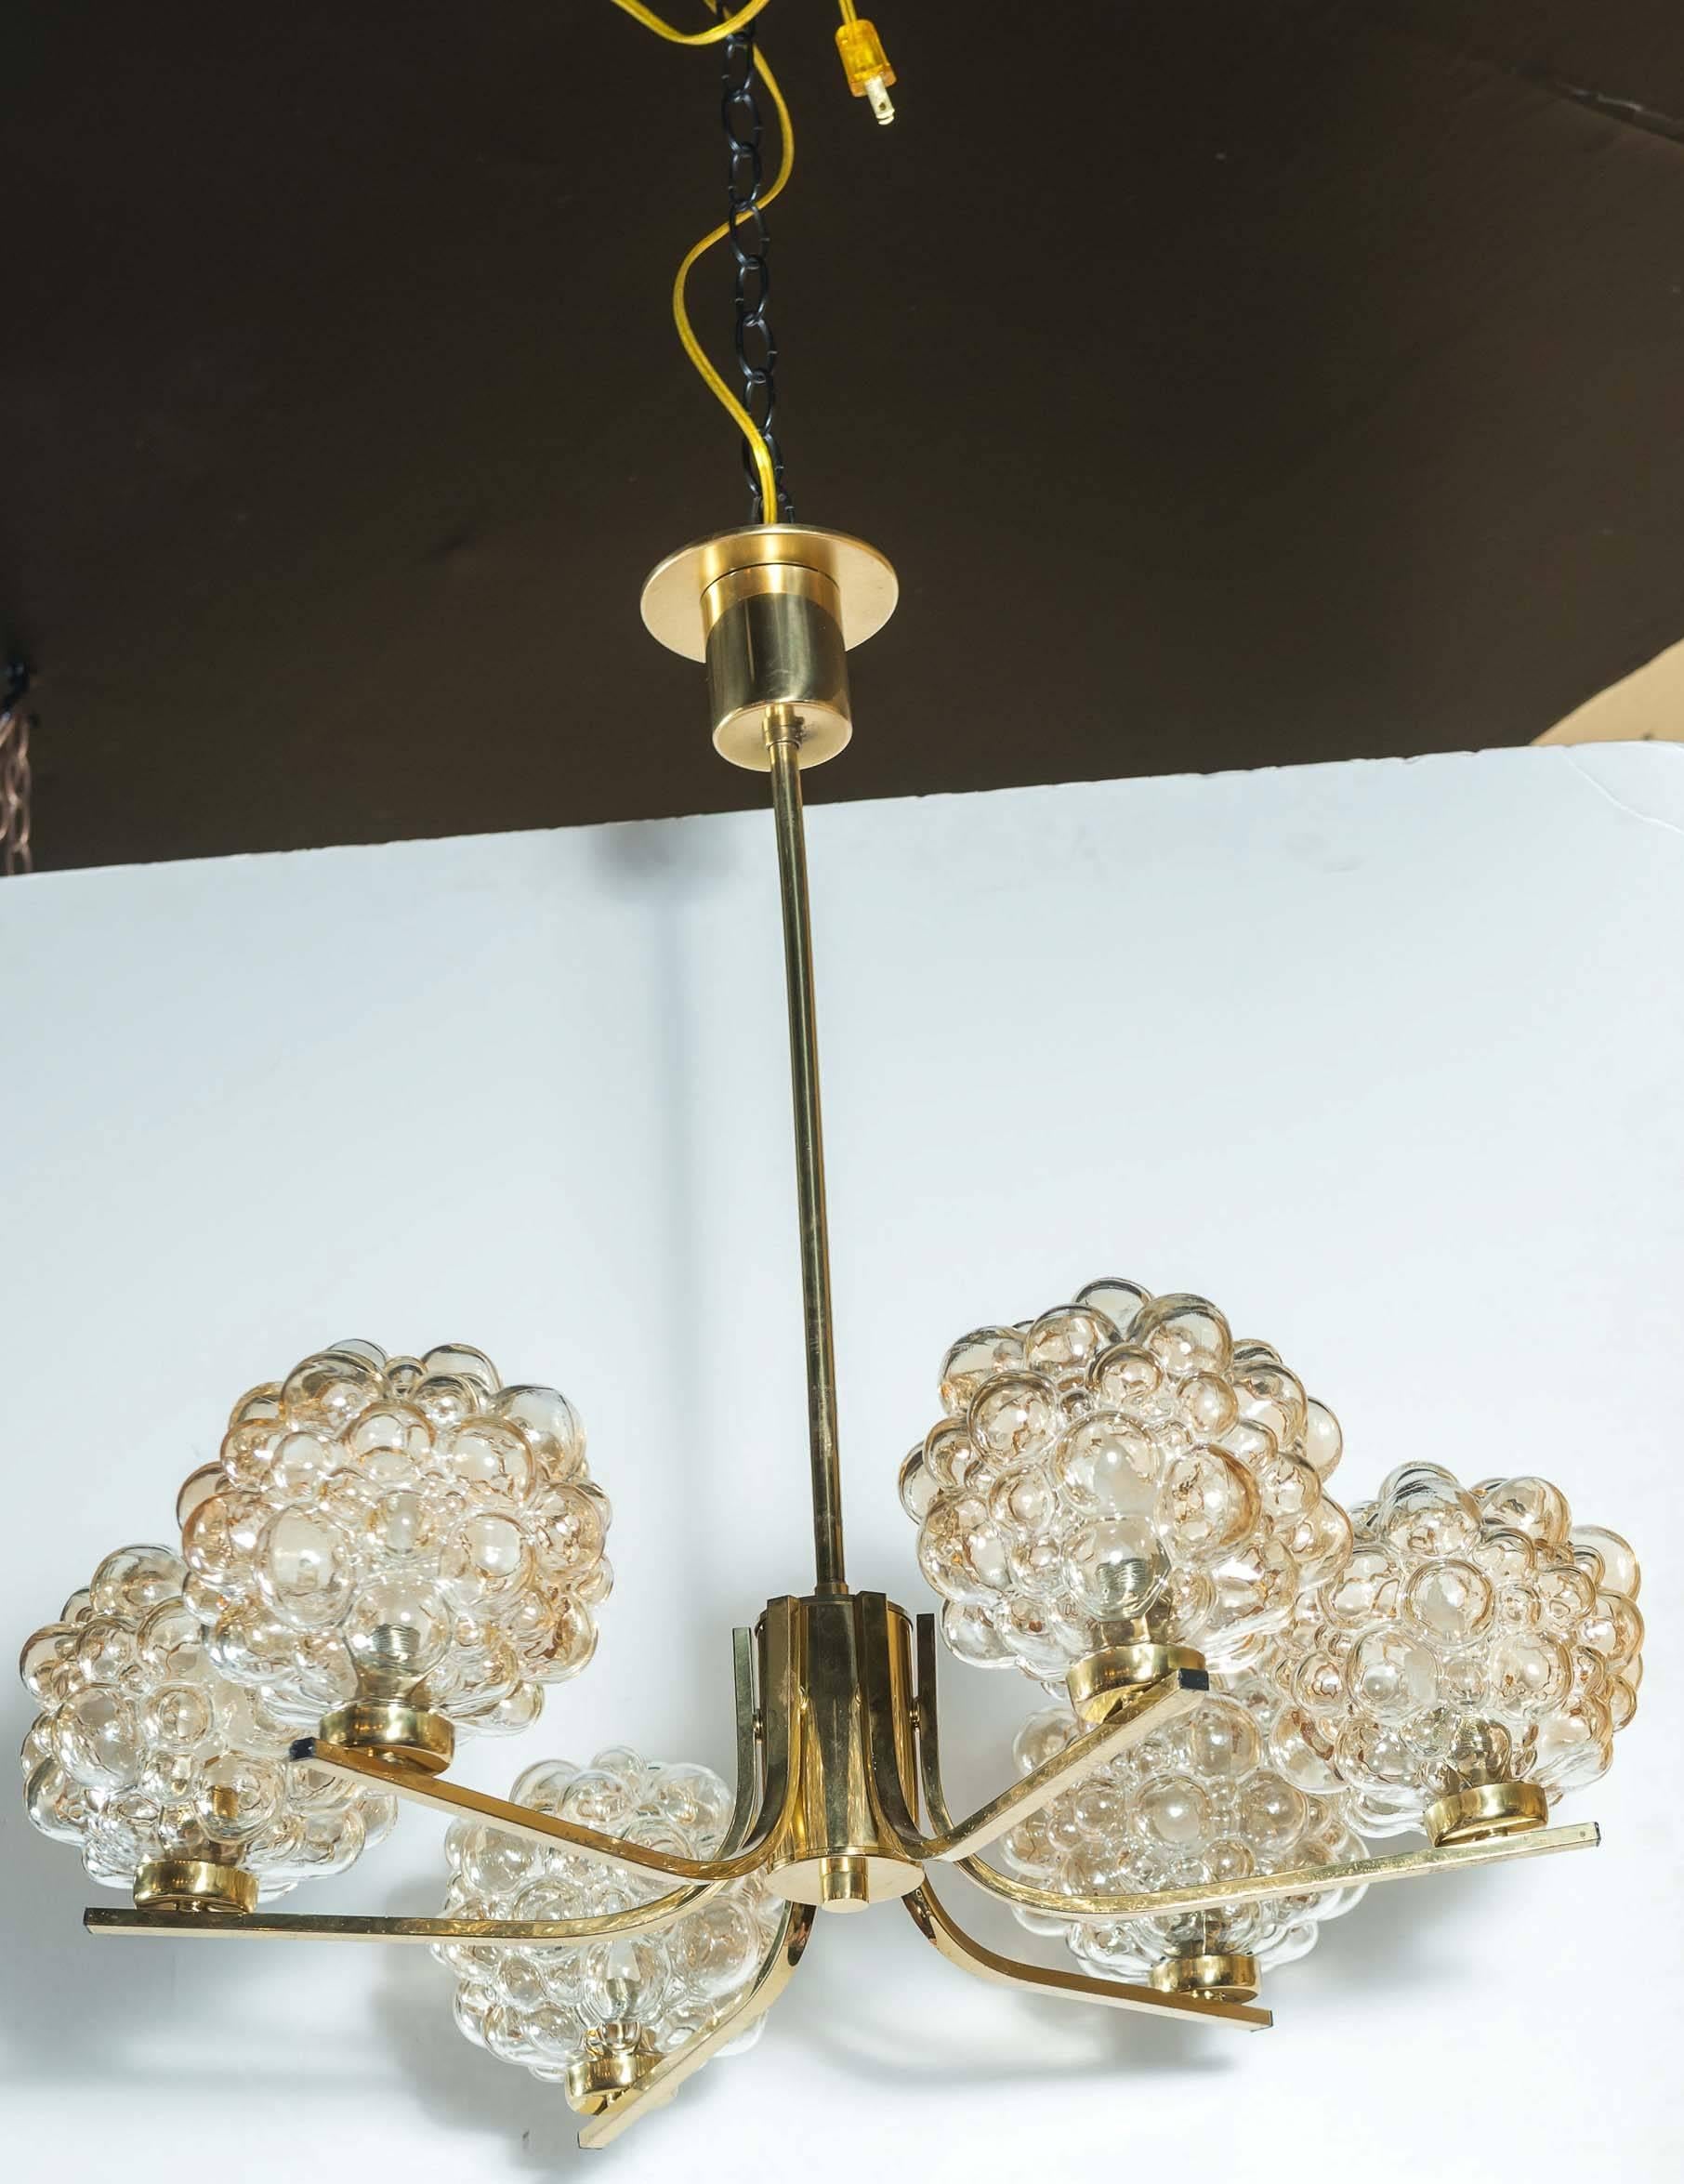 Vintage six-light amber bubble glass chandelier by Glashütte Limburg. Six lovely glass shades rest atop a polished brass frame. Newly wired, UL listing available for an additional fee.